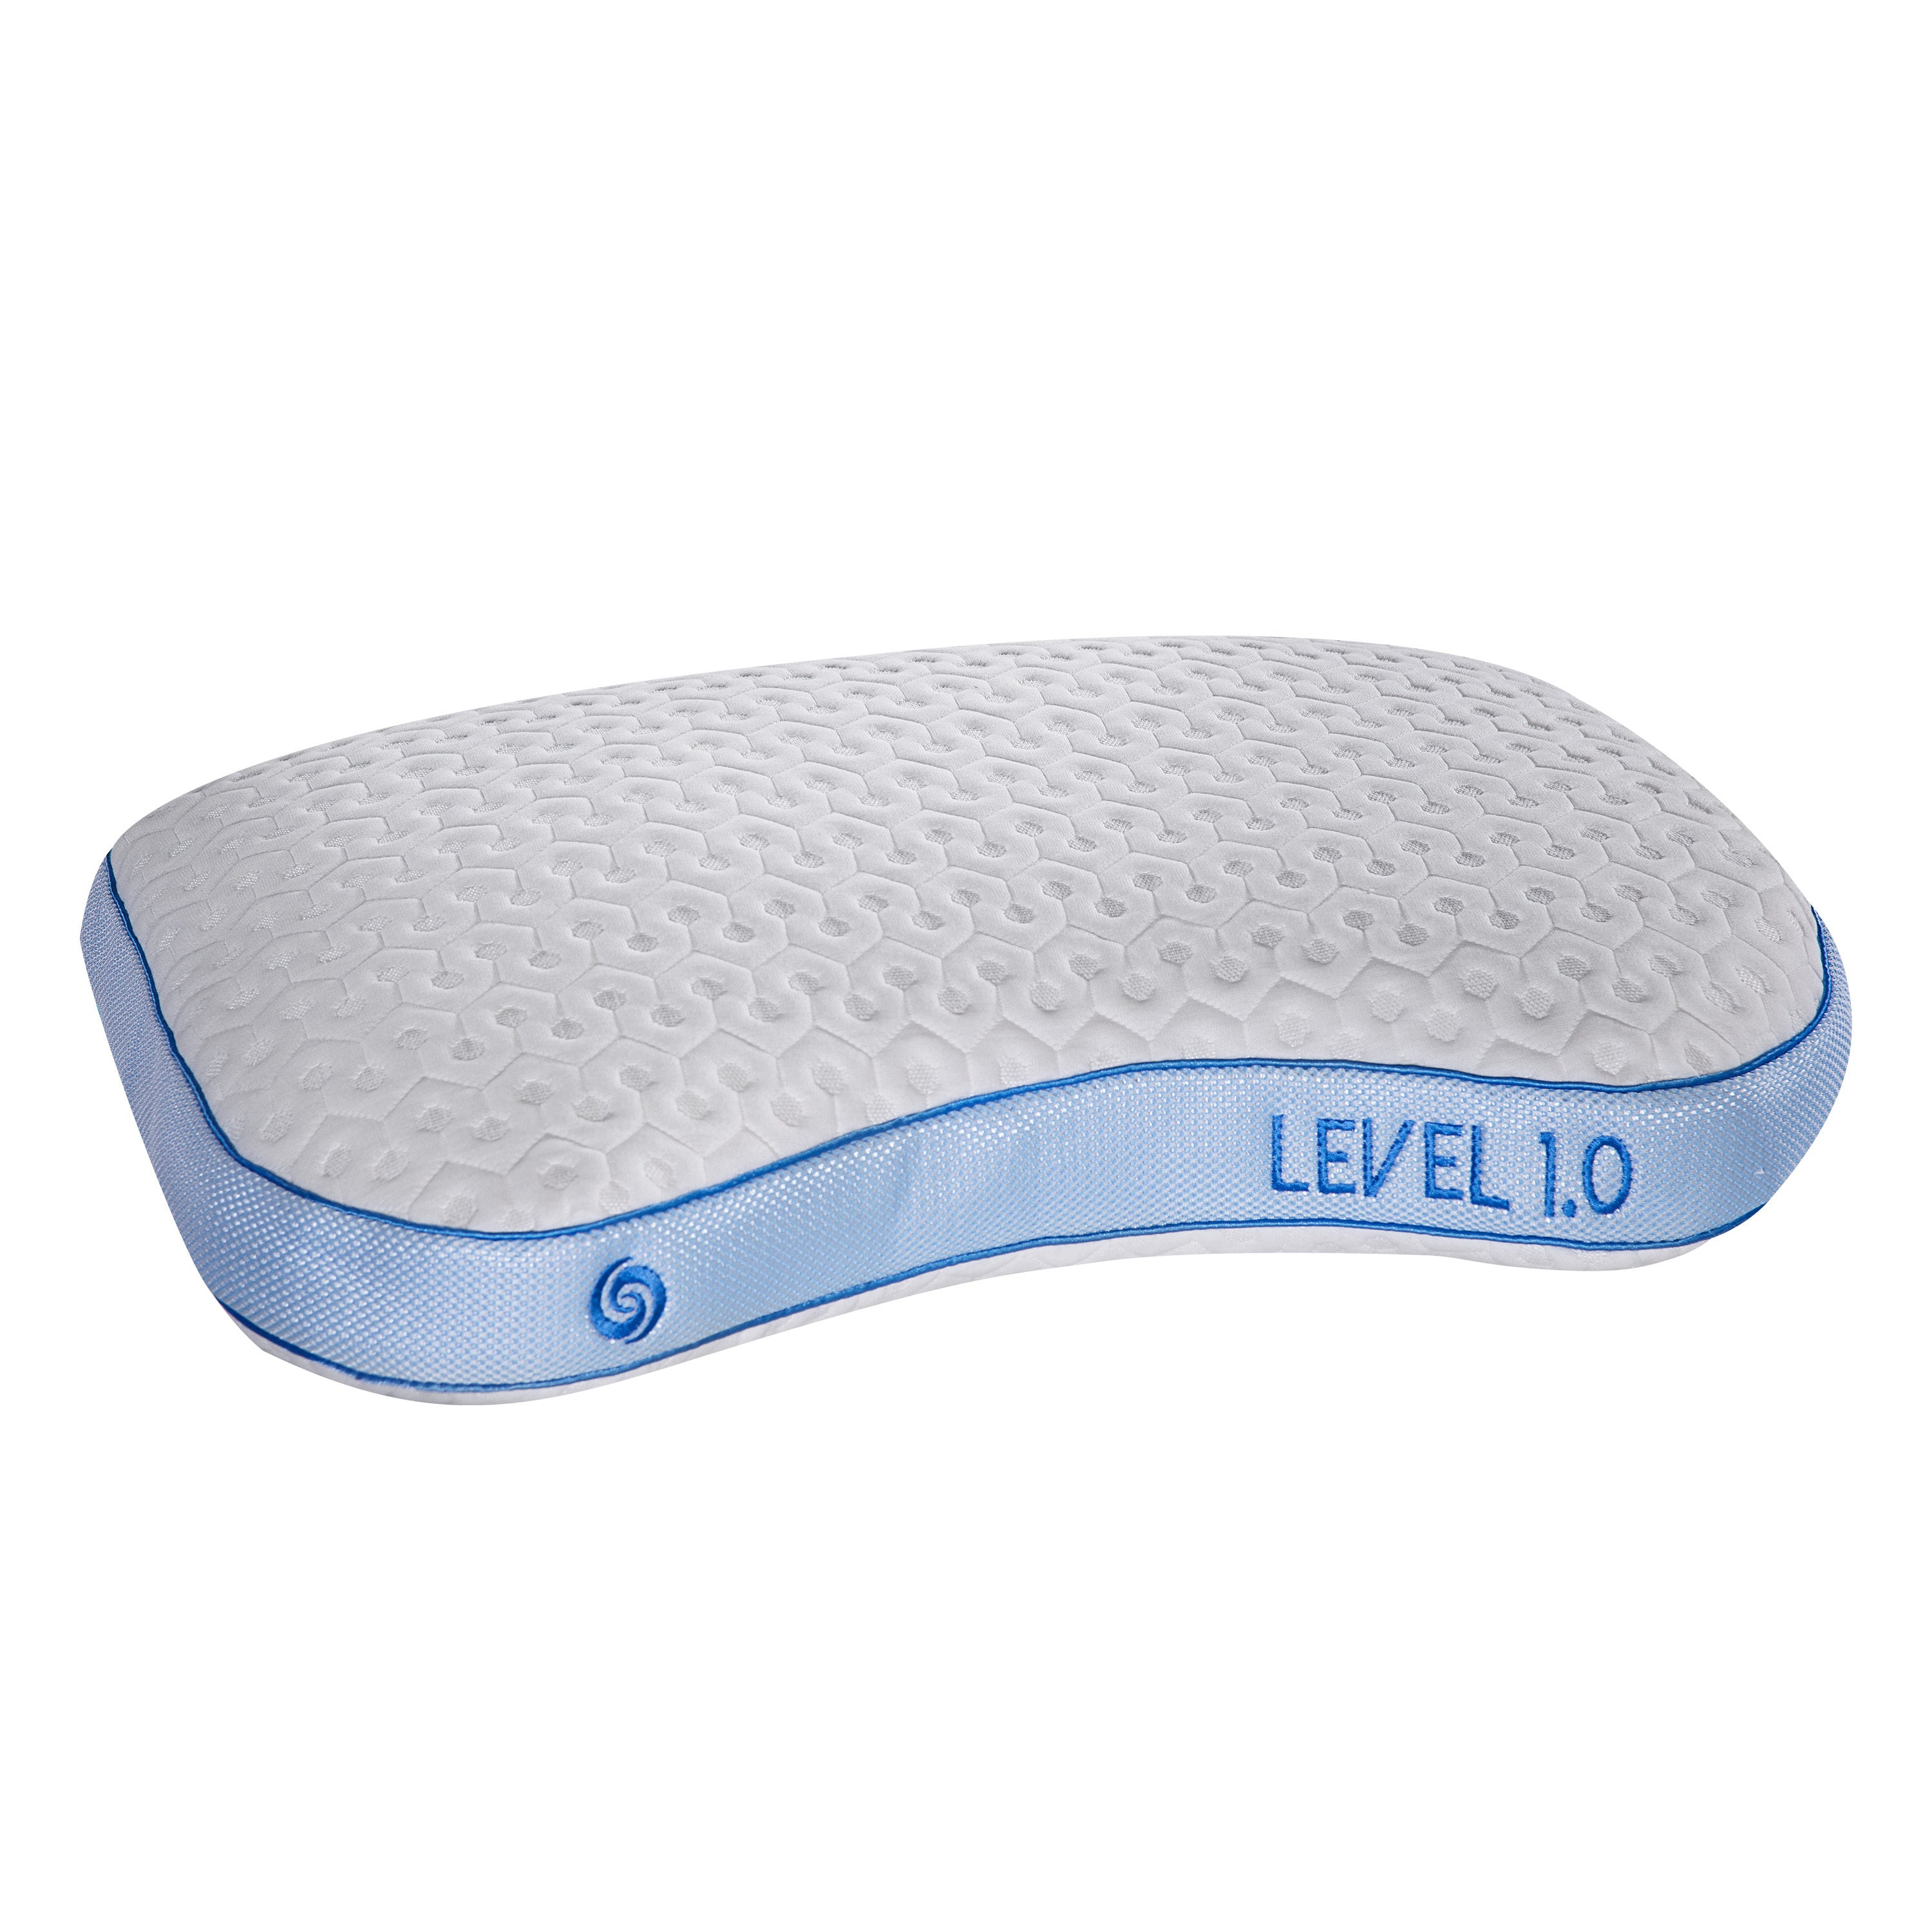 Bedgear Level 1.0 Pillow - Curated By Norwood - bedgear pillow -Level Pillow Series | Bedgear brand pillows | The best night sleep you have ever had and that is a guarantee because we have sleep tested each product ourselves | Bedgear 1.0 Pillows | 1.0 Pillows by Bedgear | Bedgear Pillows | New Series by Bedgear Pillows | 1.0 by Bedgear Pillows | Bedgear Performance Series | Level Pillows | Level Pillow Series | Level Series Pillows